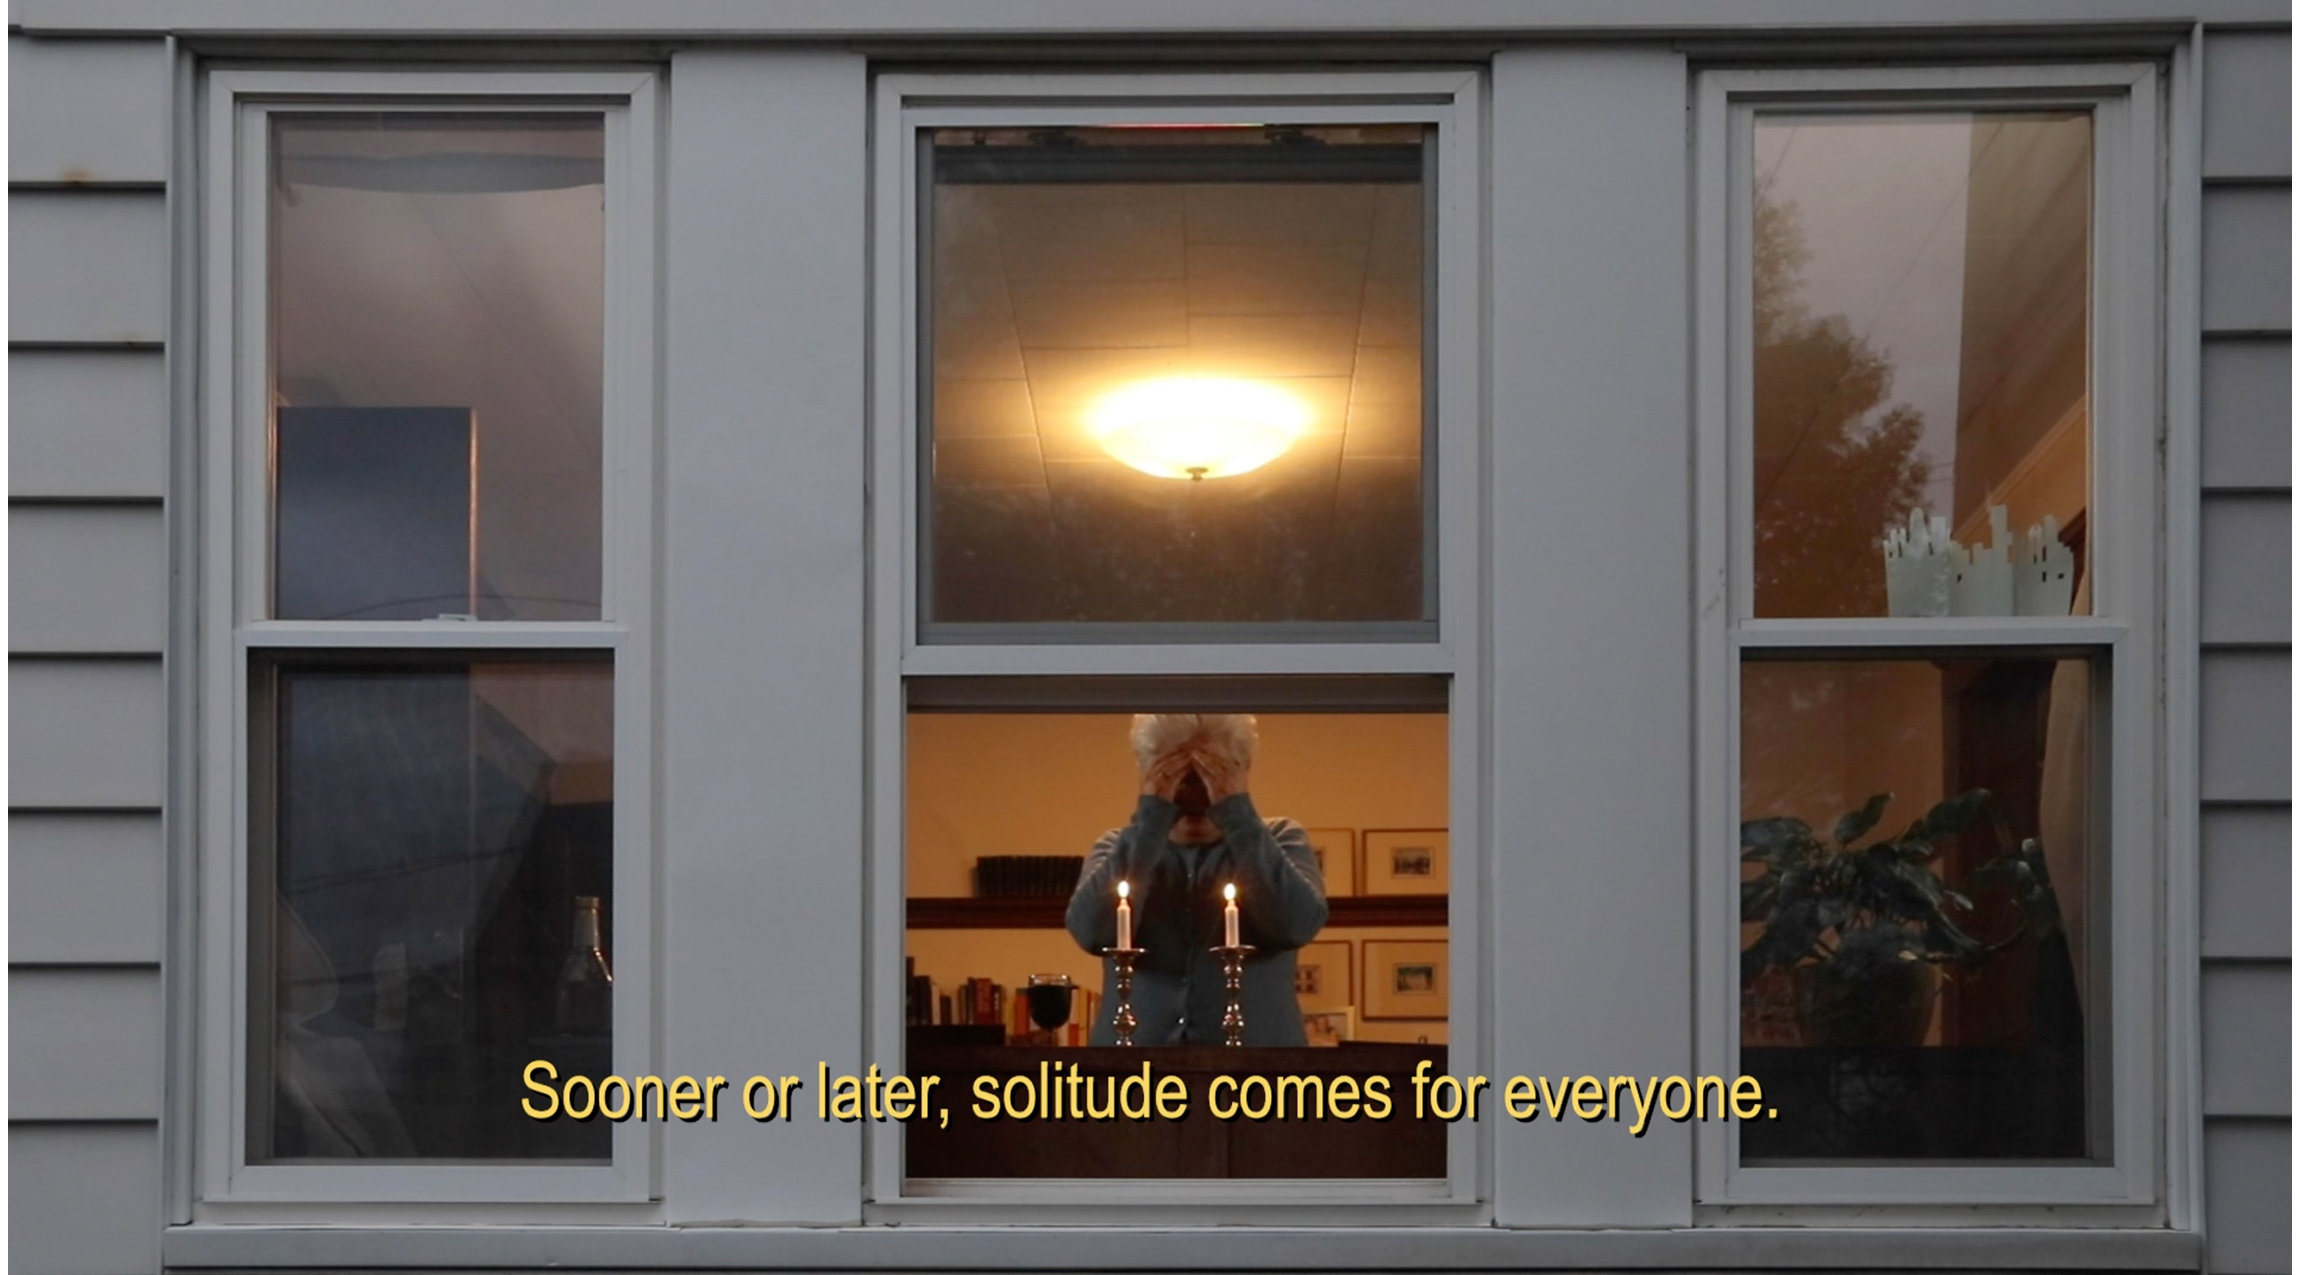 woman seen through windows of house, standing in front of candles. text at bottom reads: "Sooner or later, solitude comes for everyone."